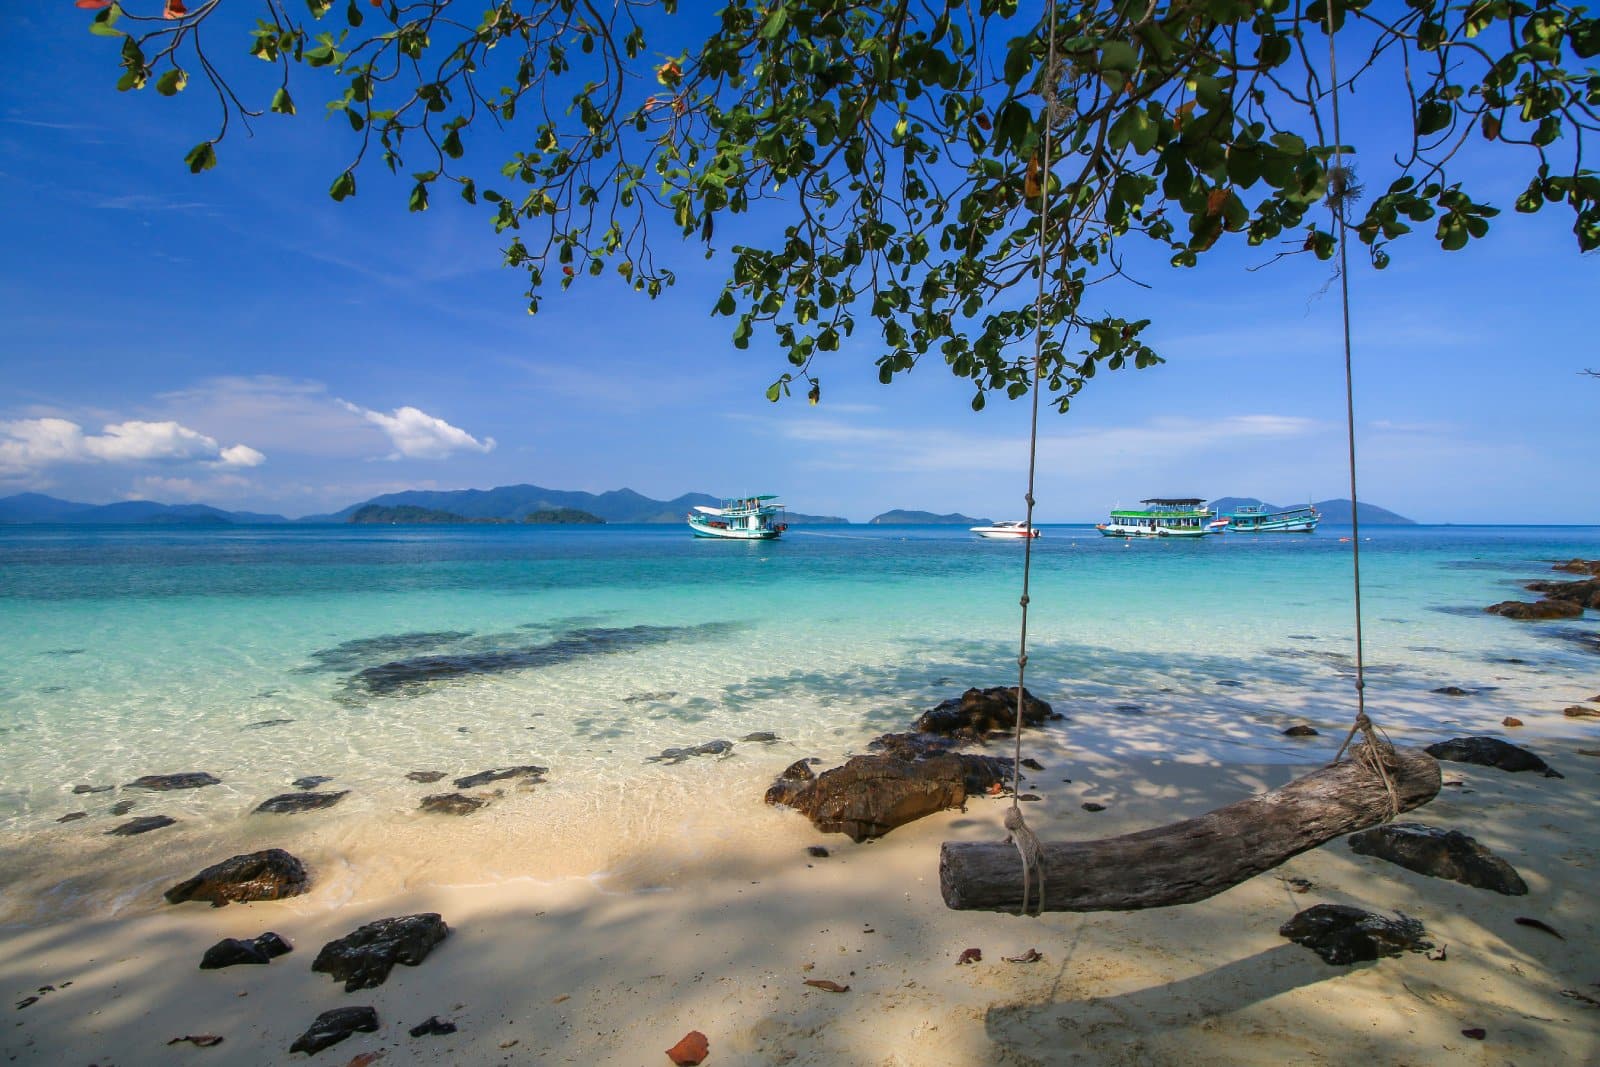 <p class="wp-caption-text">Image Credit: Shutterstock / APICHIT BOV</p>  <p><span>Koh Wai, nestled between Koh Chang and Koh Mak, is a peaceful sanctuary for travelers seeking to disconnect and immerse themselves in nature. With its pristine beaches and clear, shallow waters, this small island is a paradise for snorkelers and those looking to unwind in a serene setting. The coral reefs just offshore are teeming with marine life, providing easy access to an underwater world of wonder. With only a few accommodations and no roads, Koh Wai encourages a simple, eco-friendly approach to island life, where electricity is limited, and the stars light up the night sky. The island’s commitment to preserving its natural beauty and providing a haven of tranquility makes Koh Wai a precious jewel in Thailand’s archipelago, inviting visitors to experience the essence of untouched paradise.</span></p>